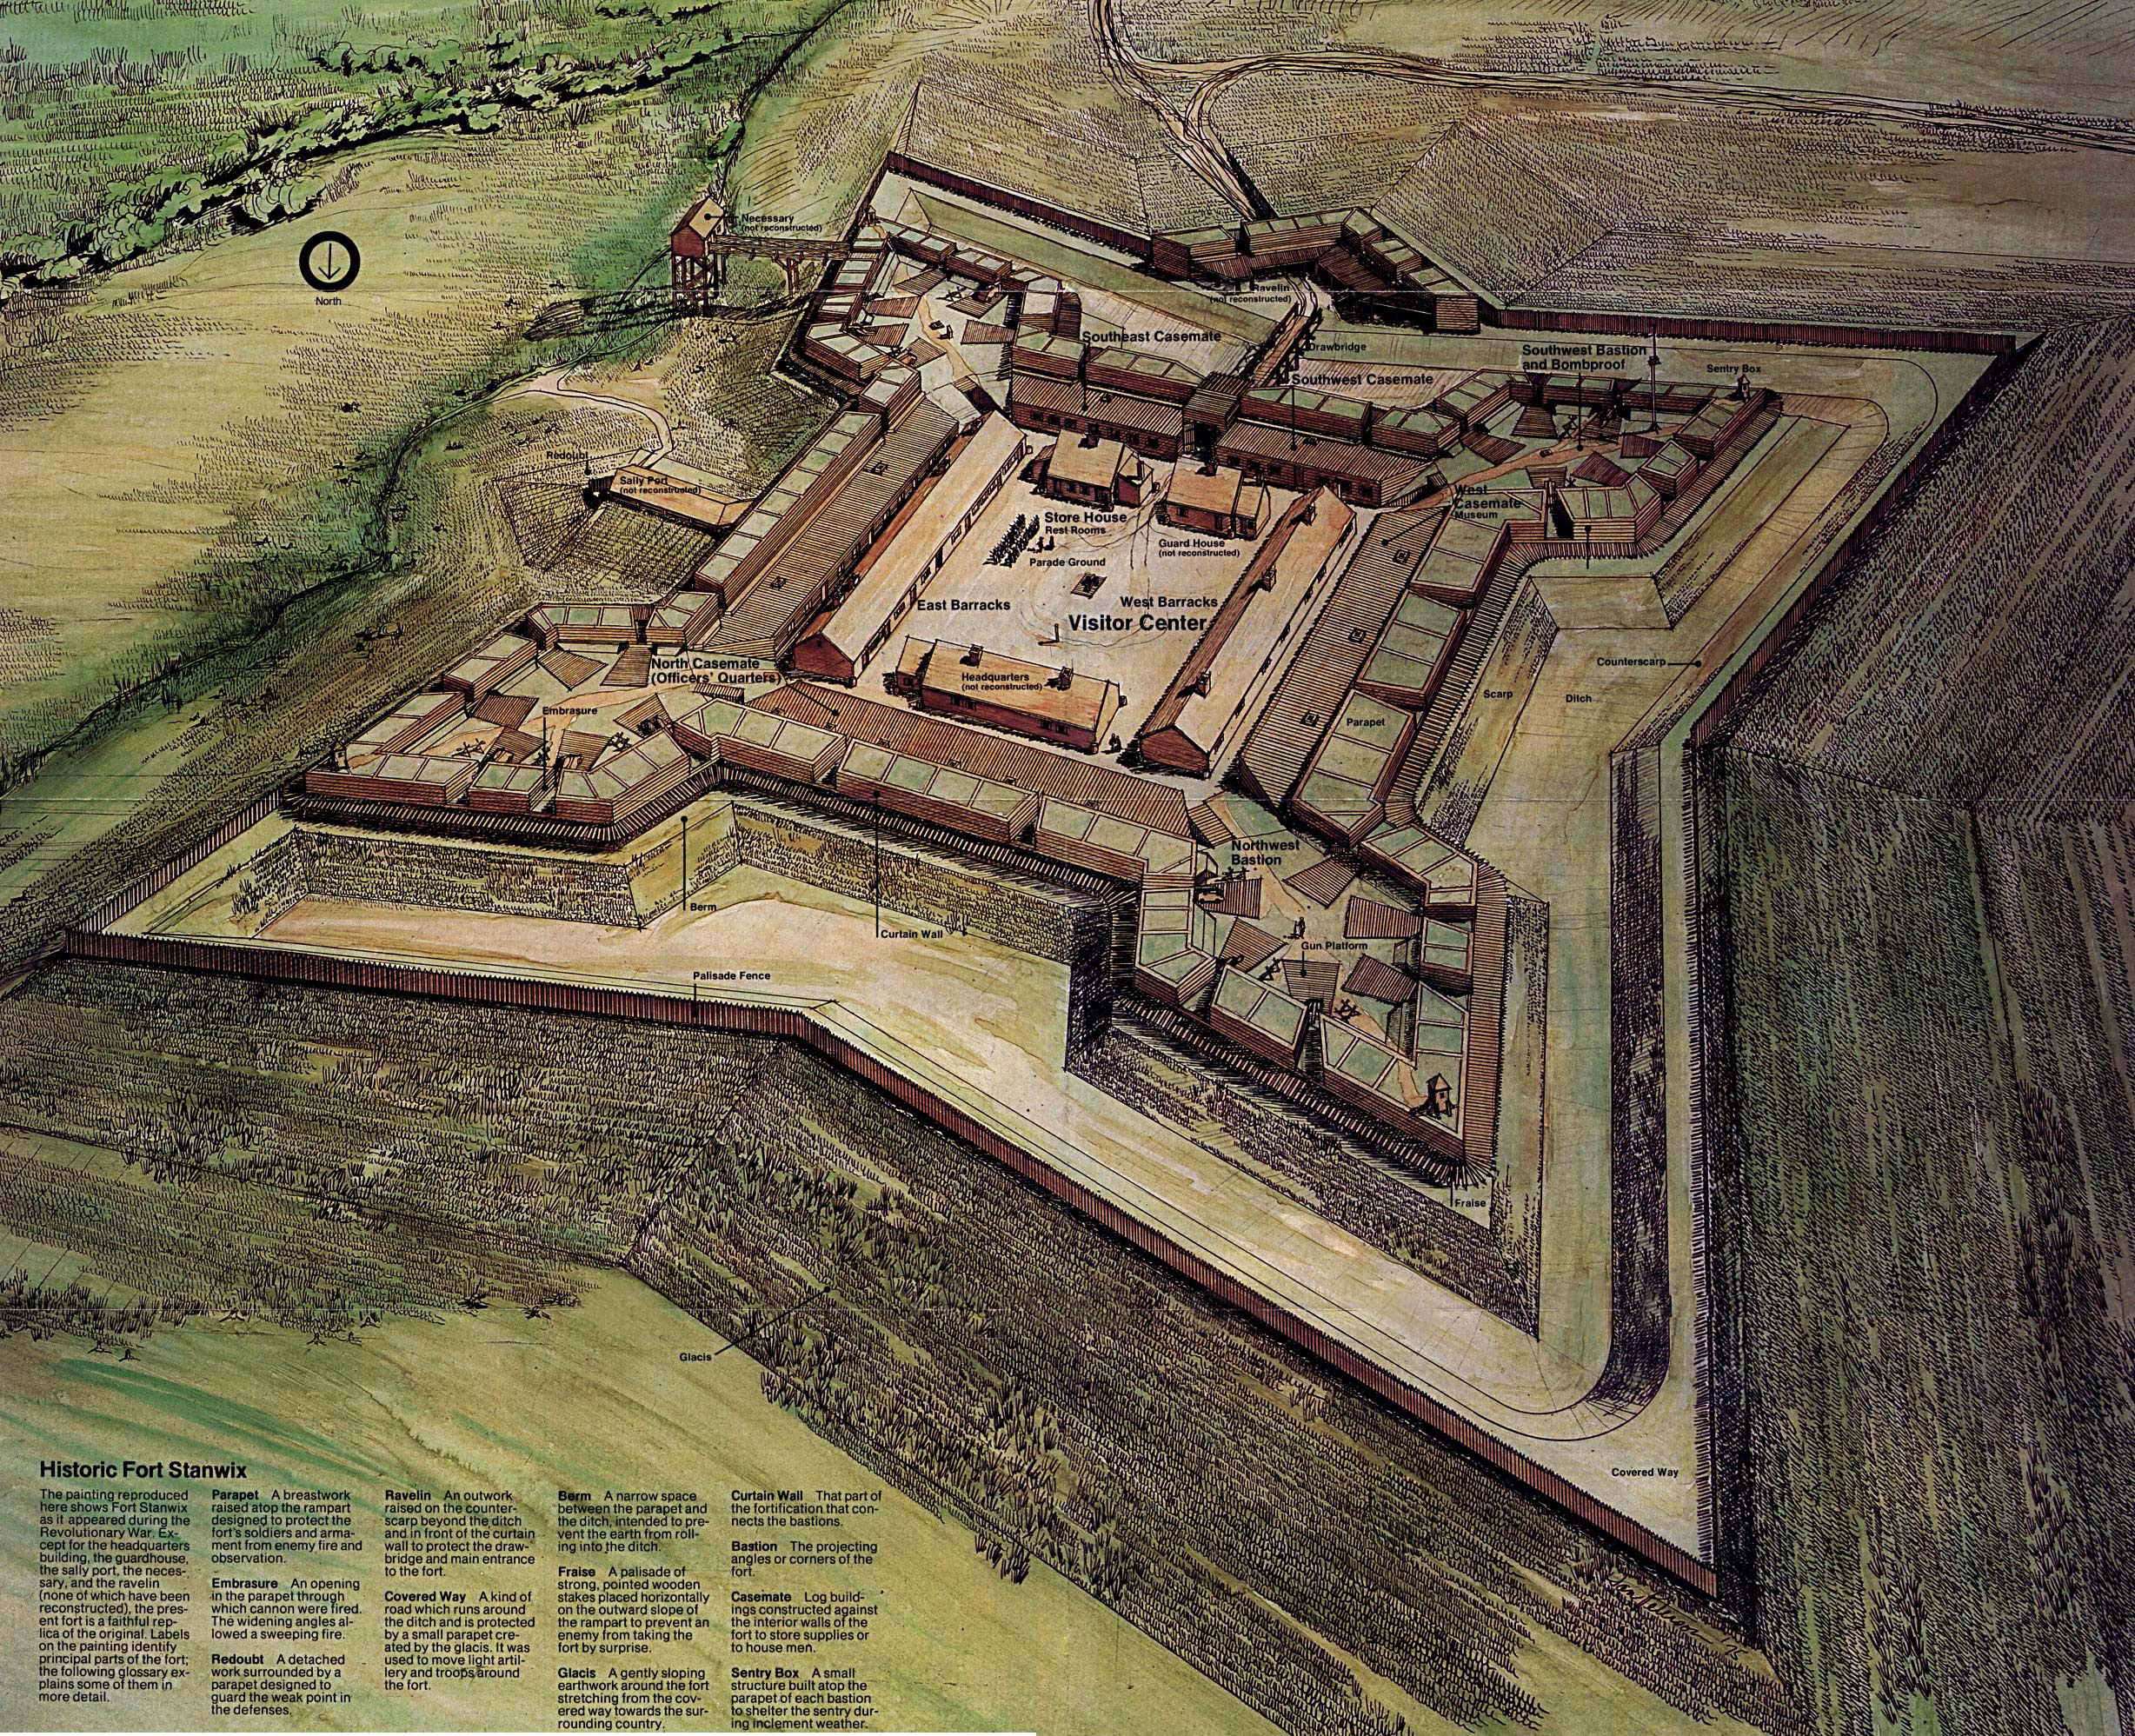 Treaty of Fort Stanwix: the purpose of which is to adjust the boundary line between Indian lands and white settlements set forth in the Proclamation of 1763 in the Thirteen Colonies